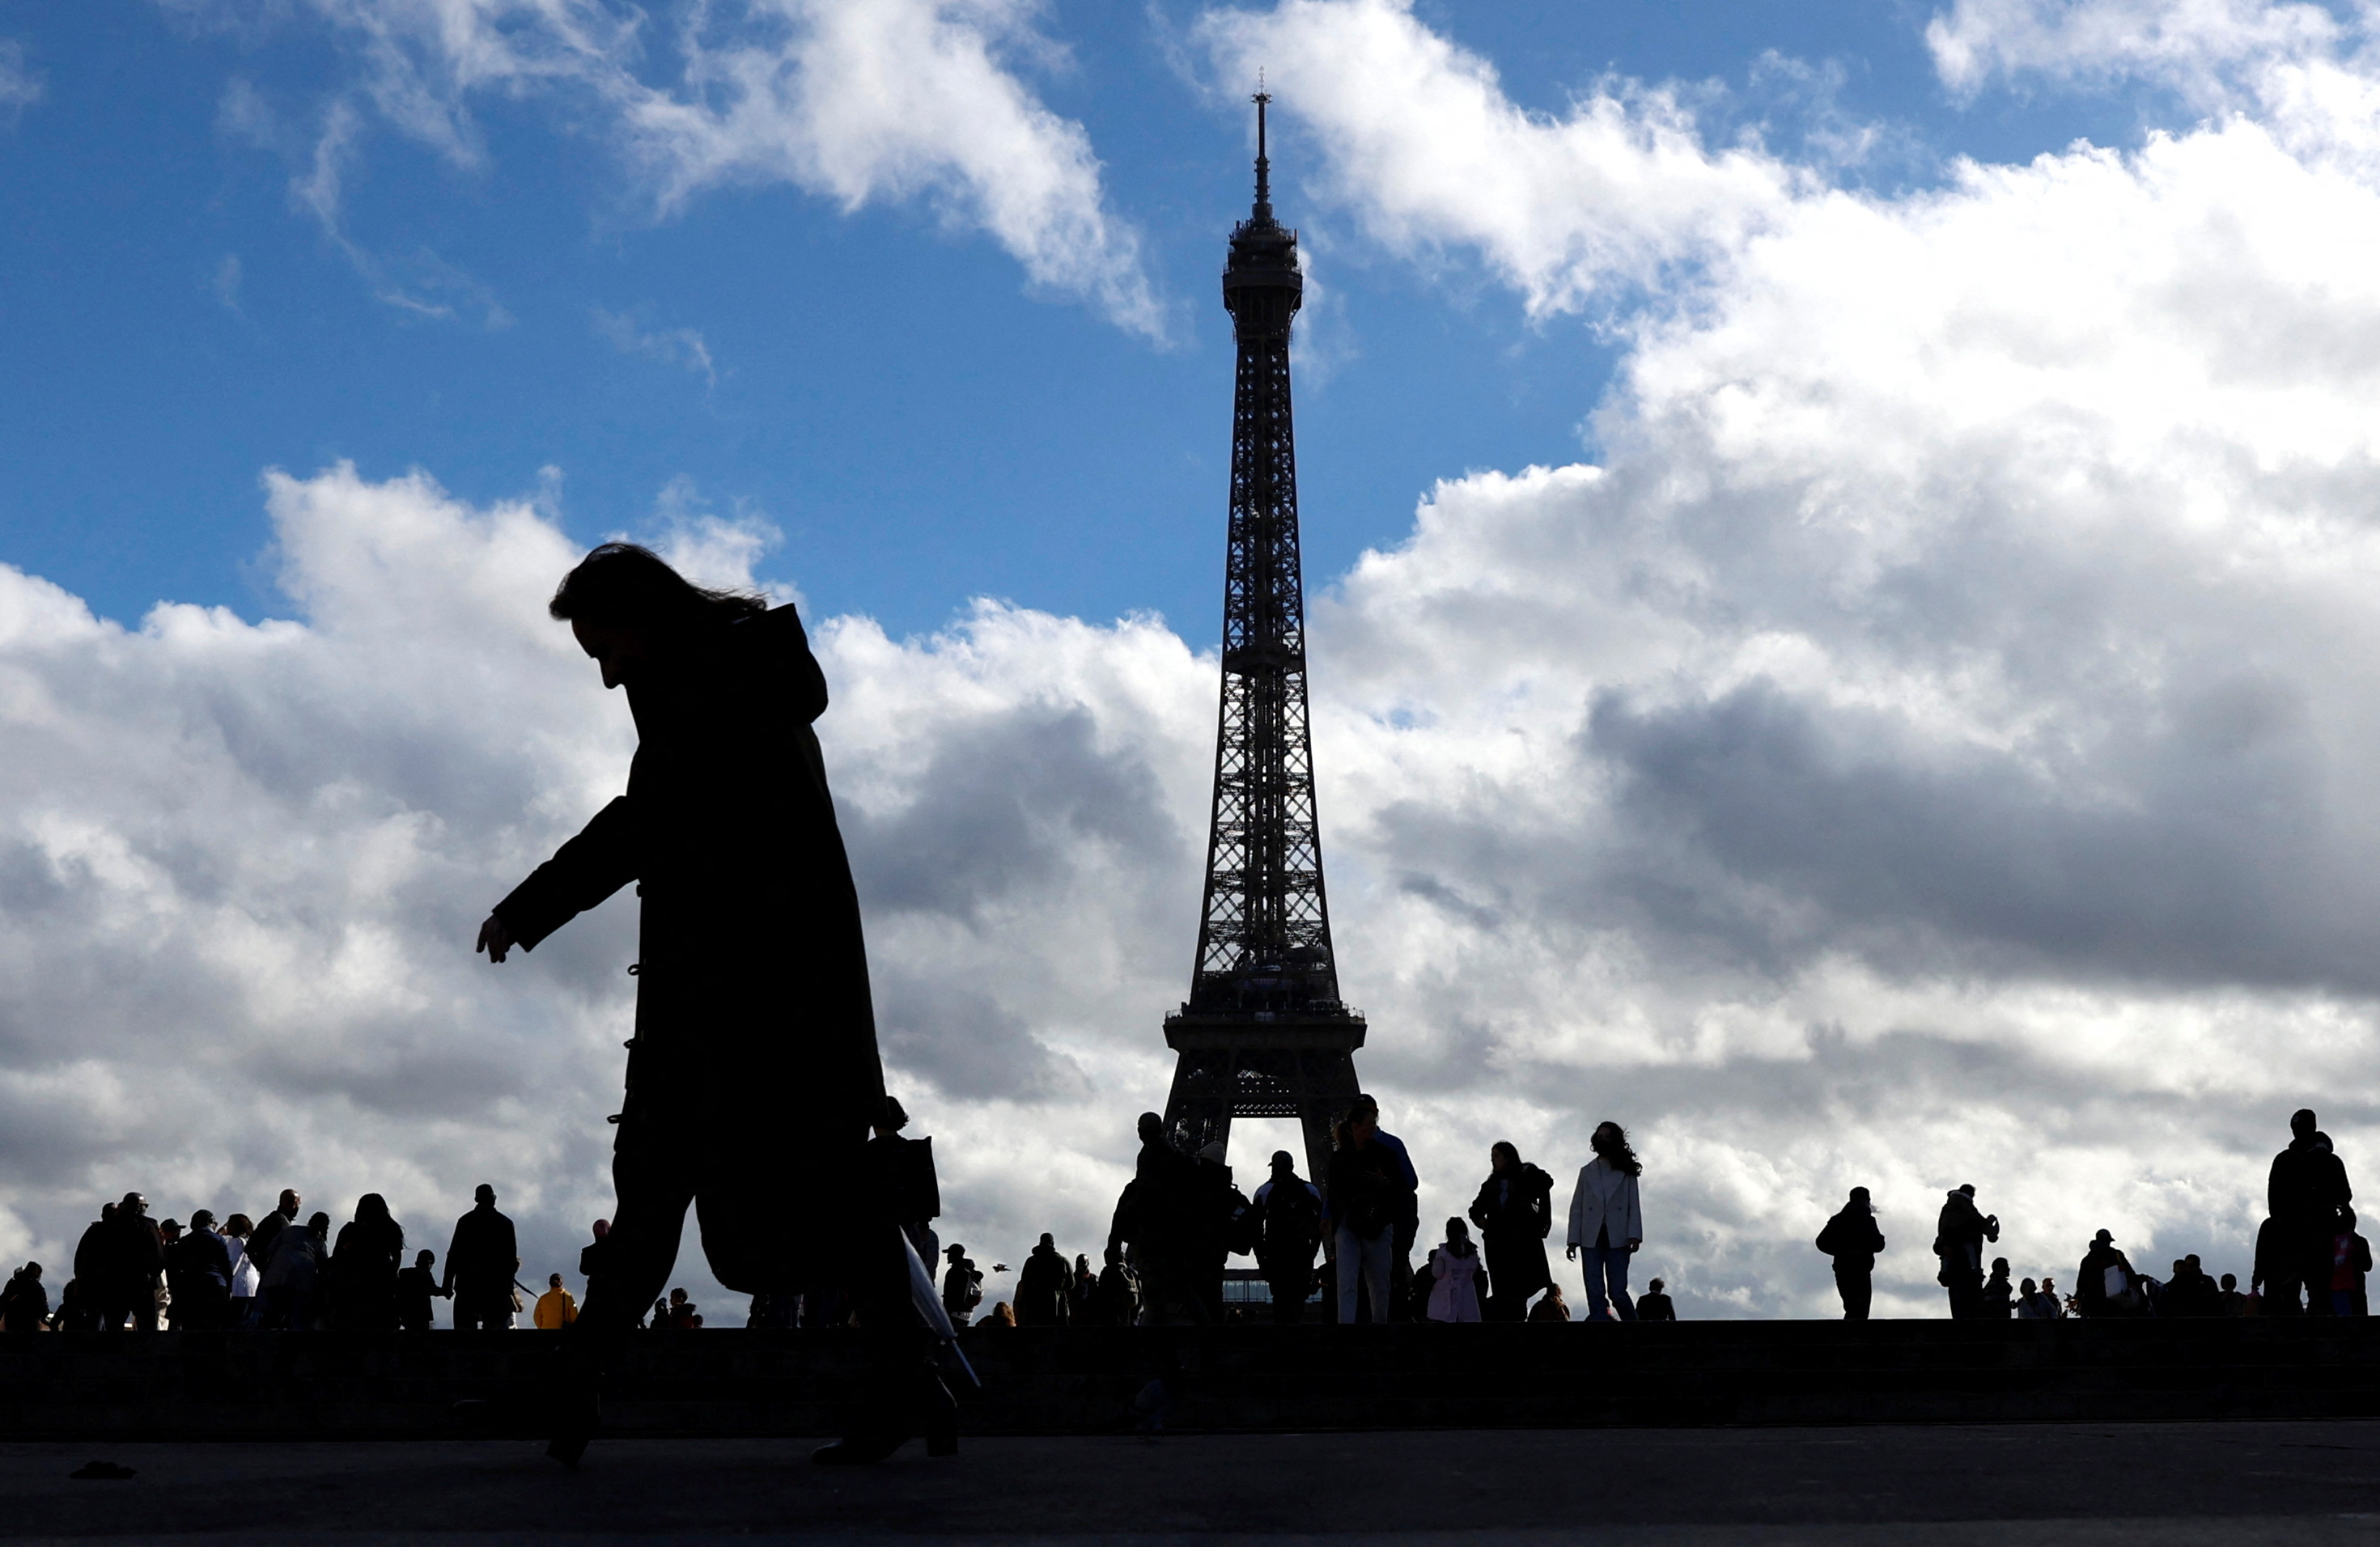 People take in views of the Eiffel Tower from the Trocadero, Paris